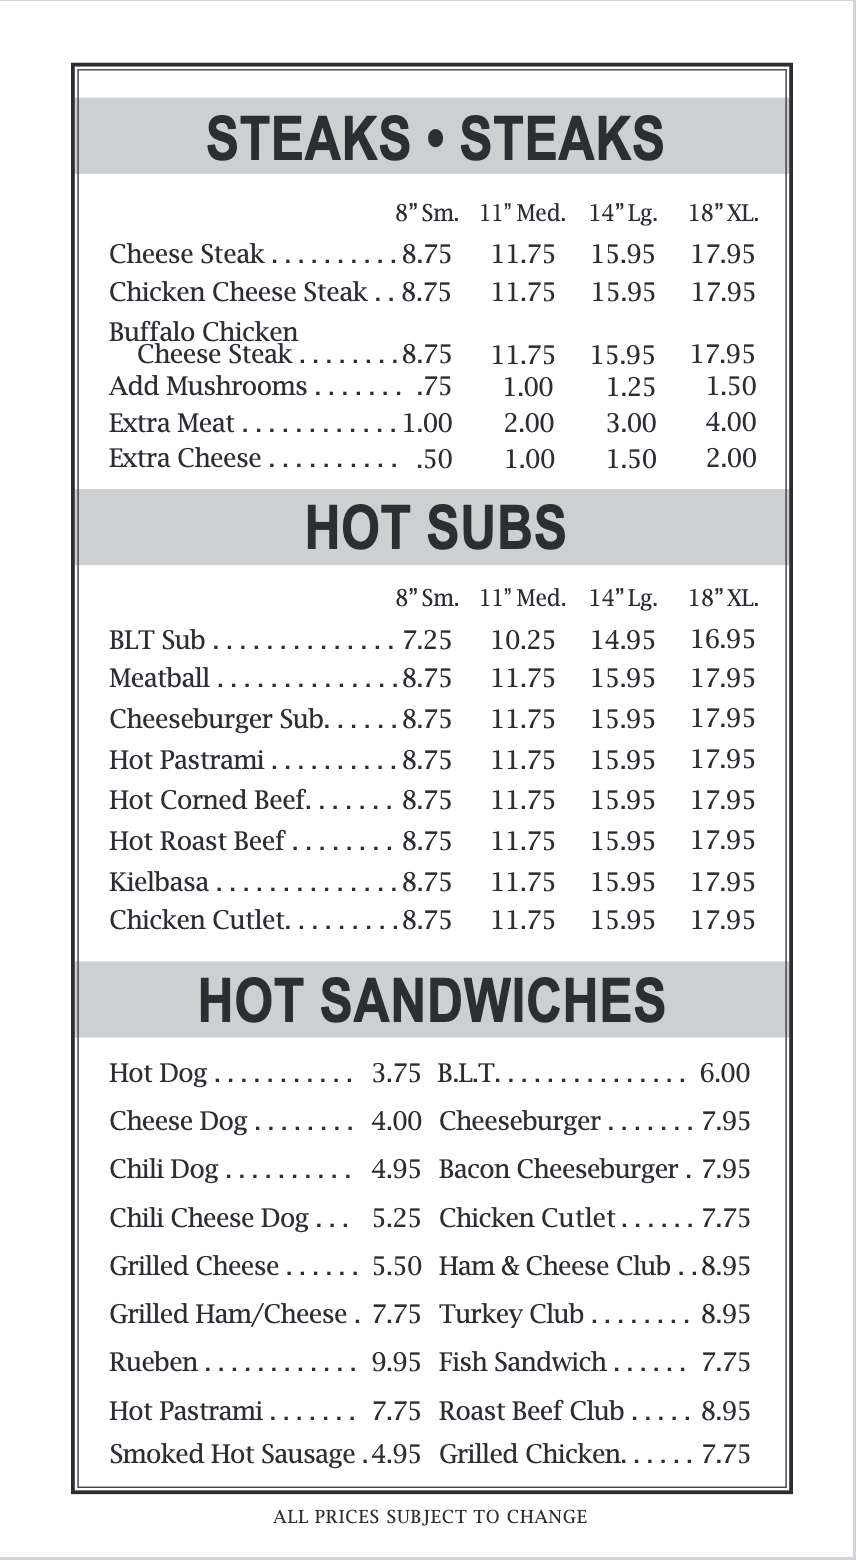 Steaks, Hot Subs and Hot Sandwiches Menu